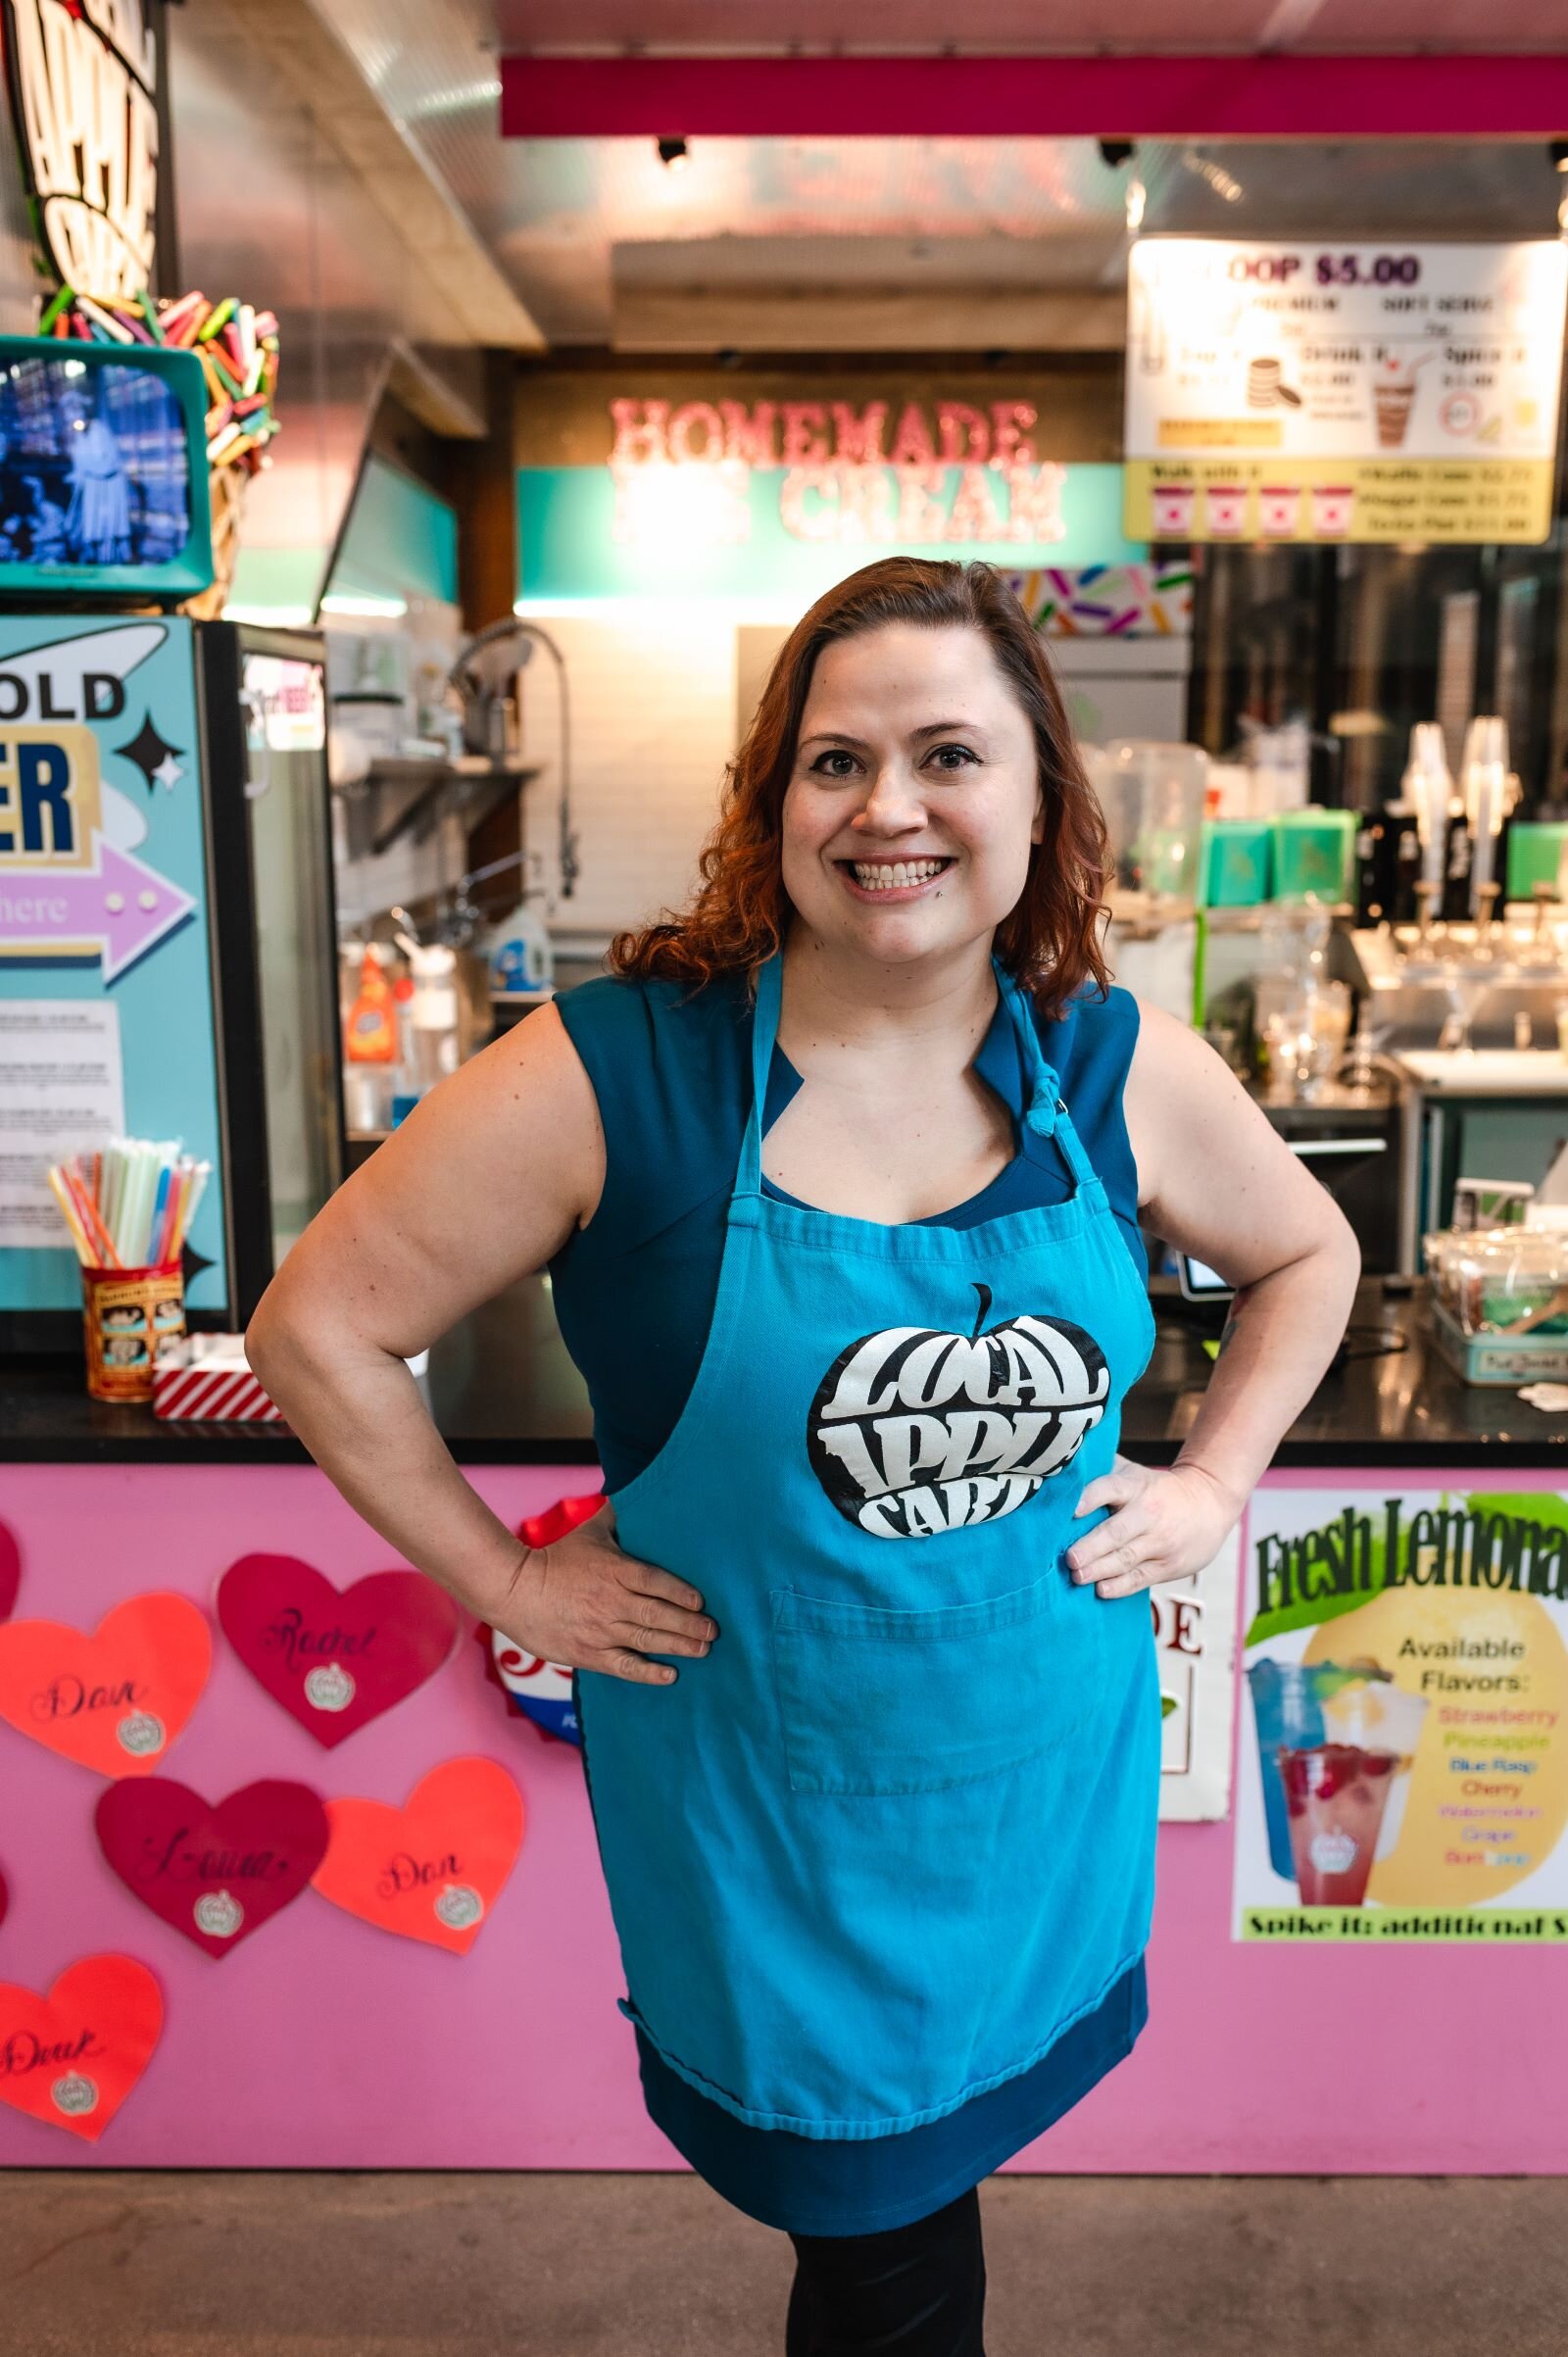 Rachel Nally is the entreprenuer behind Local Apple Cart, which makes all its ice cream in-house with local ingredients.